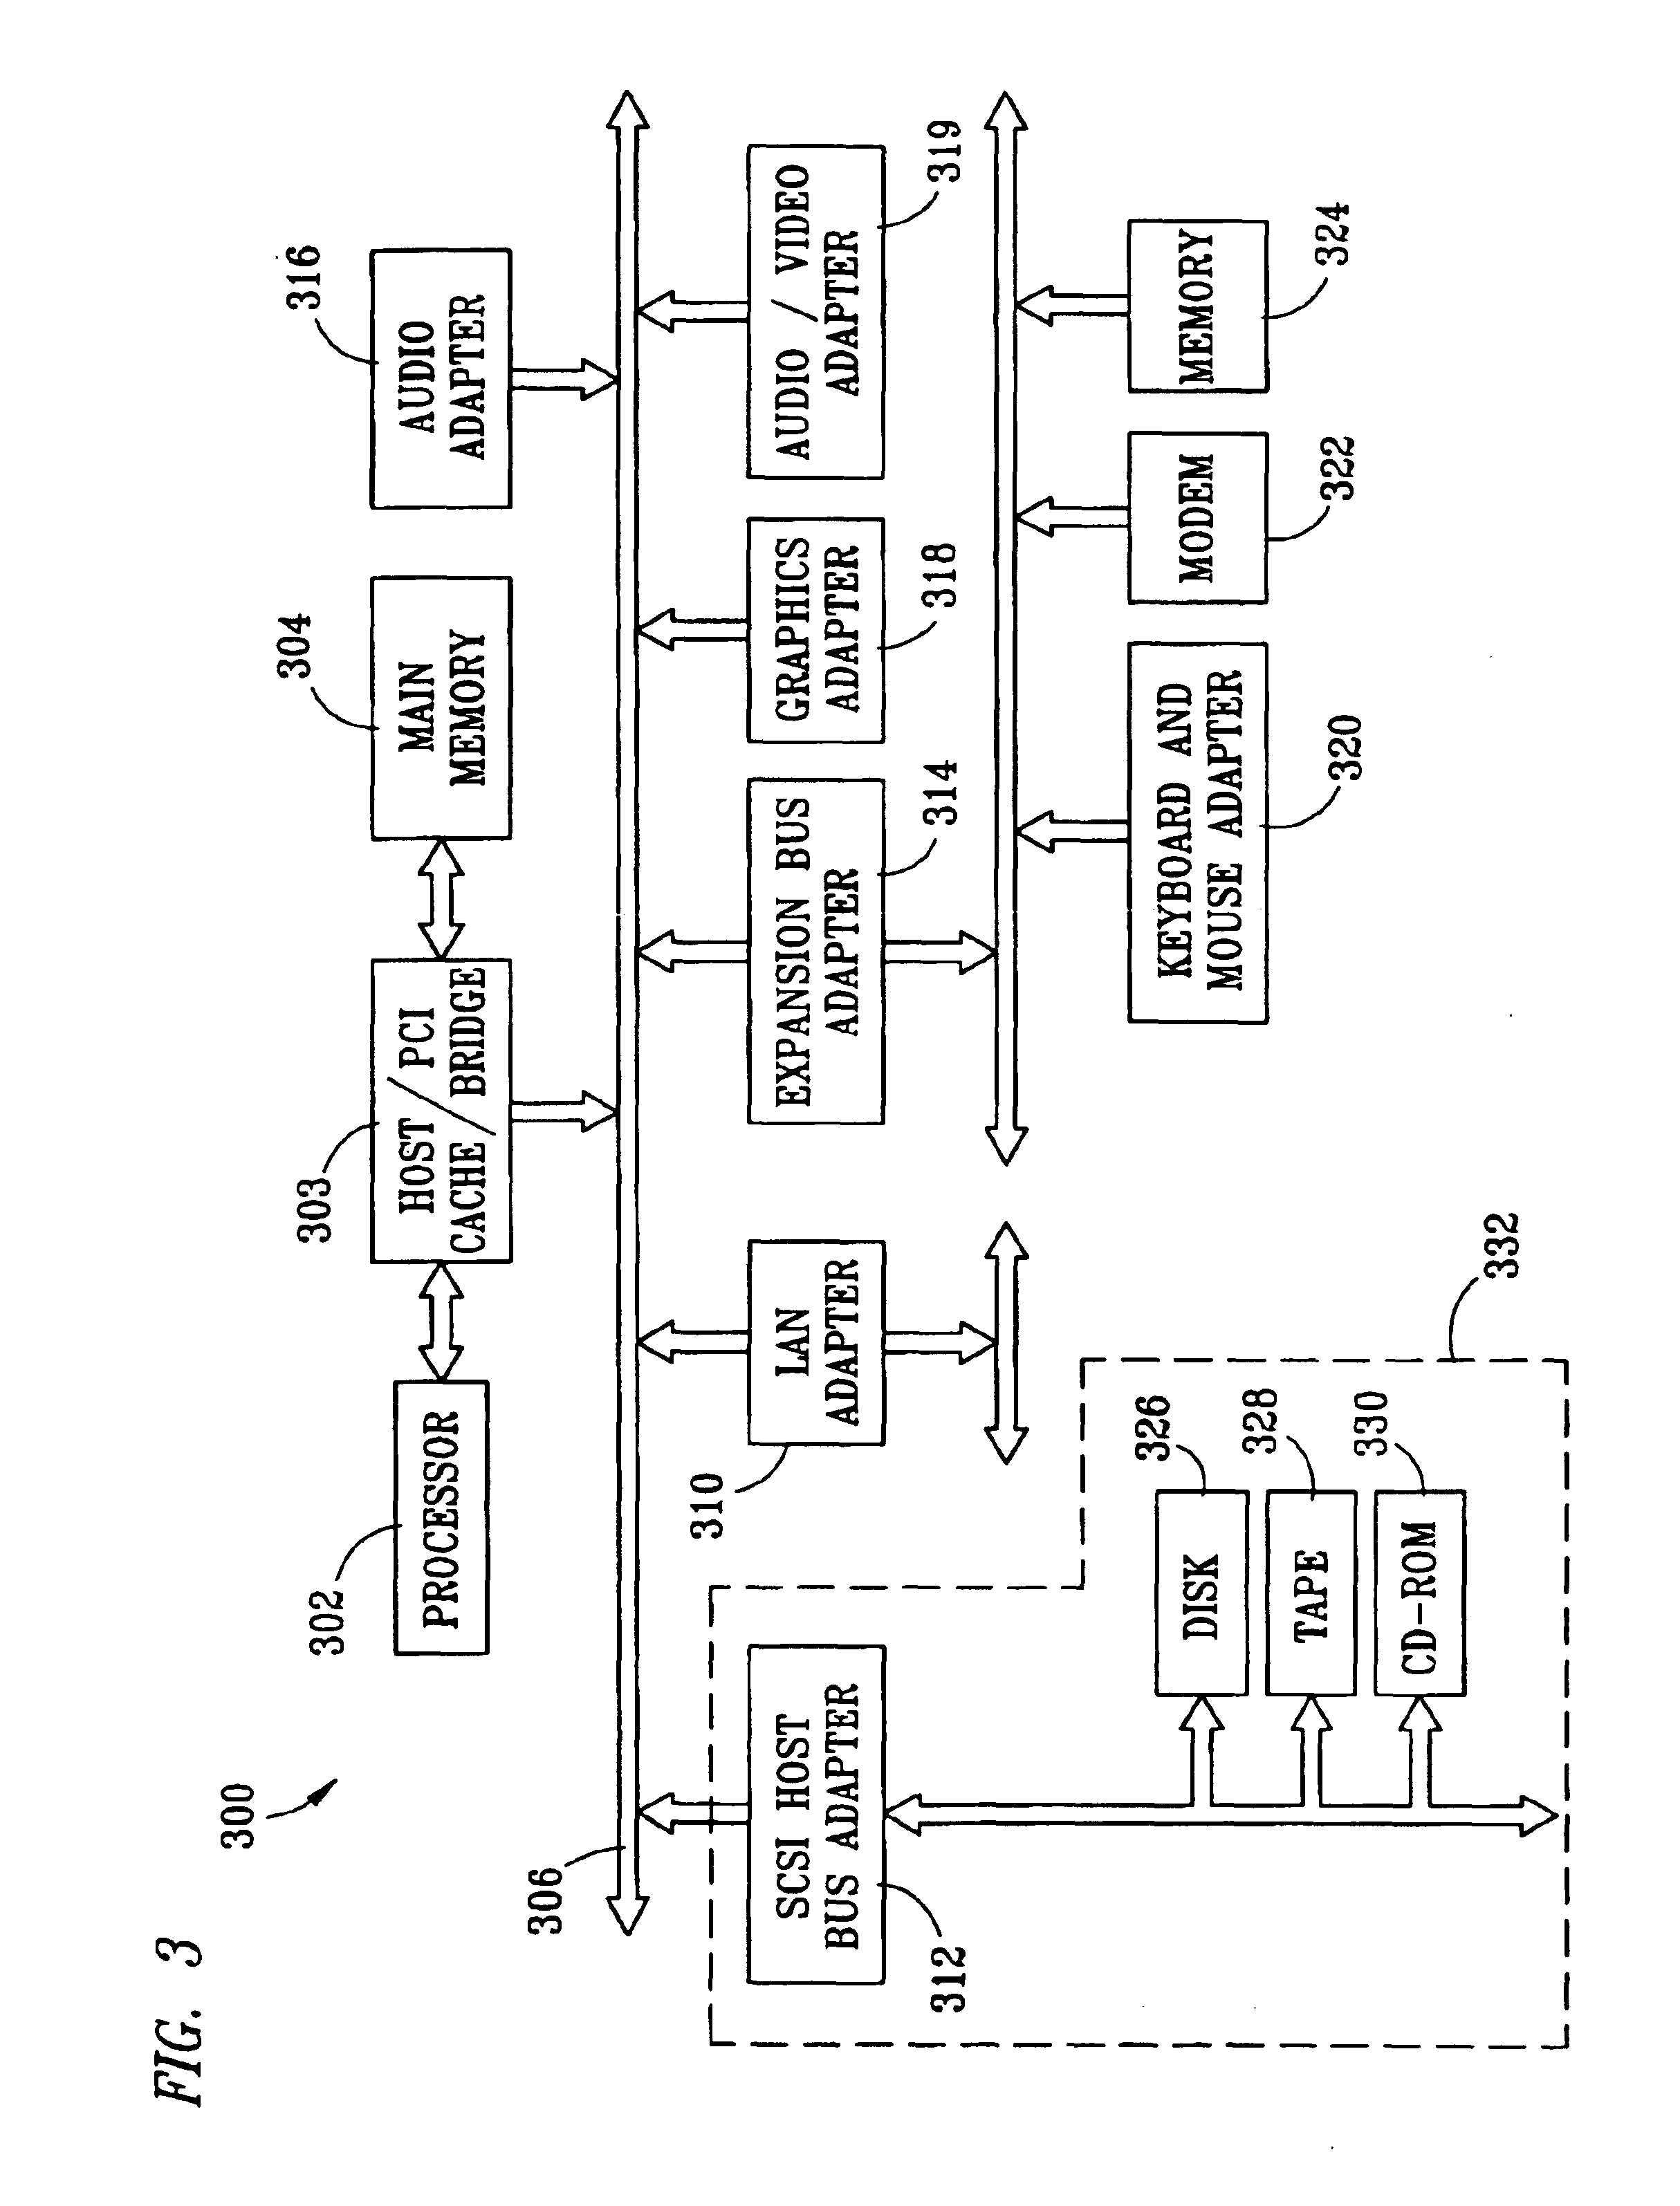 Apparatus and method for transmission and receipt of conference call roster information via a telephone display unit